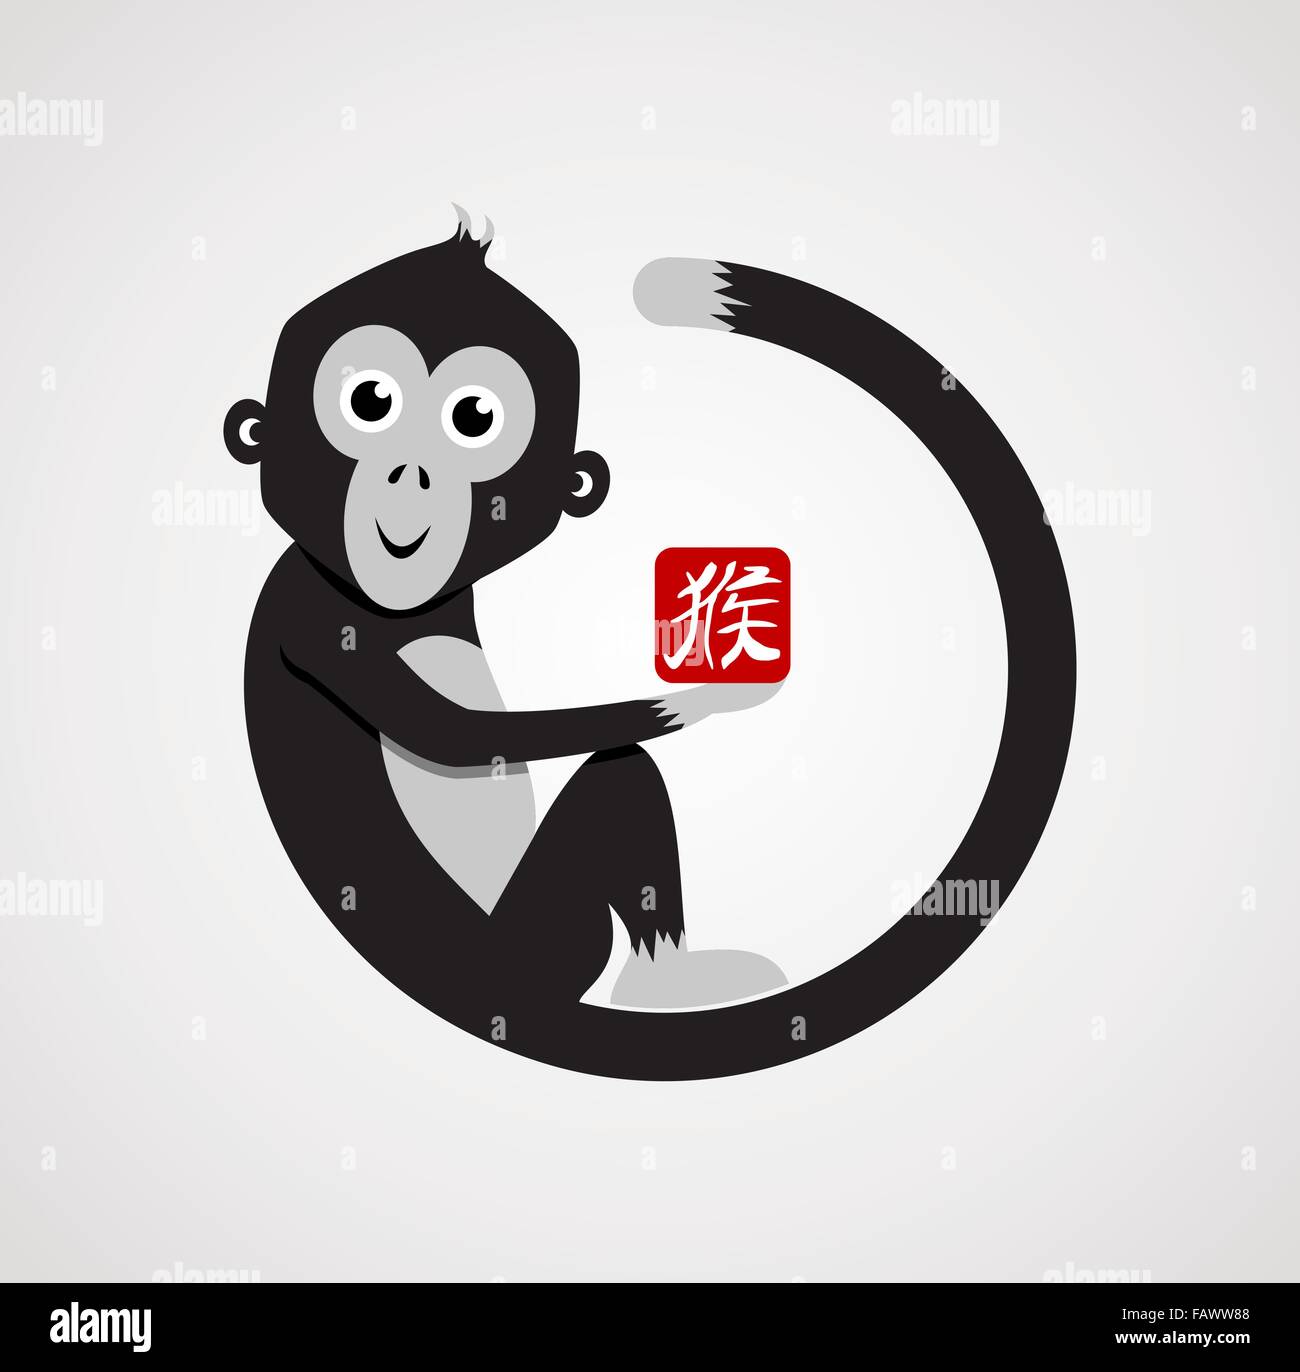 2016 Happy Chinese New Year of the Monkey. Concept illustration, cute cartoon ape in black and white with traditional text. Stock Vector